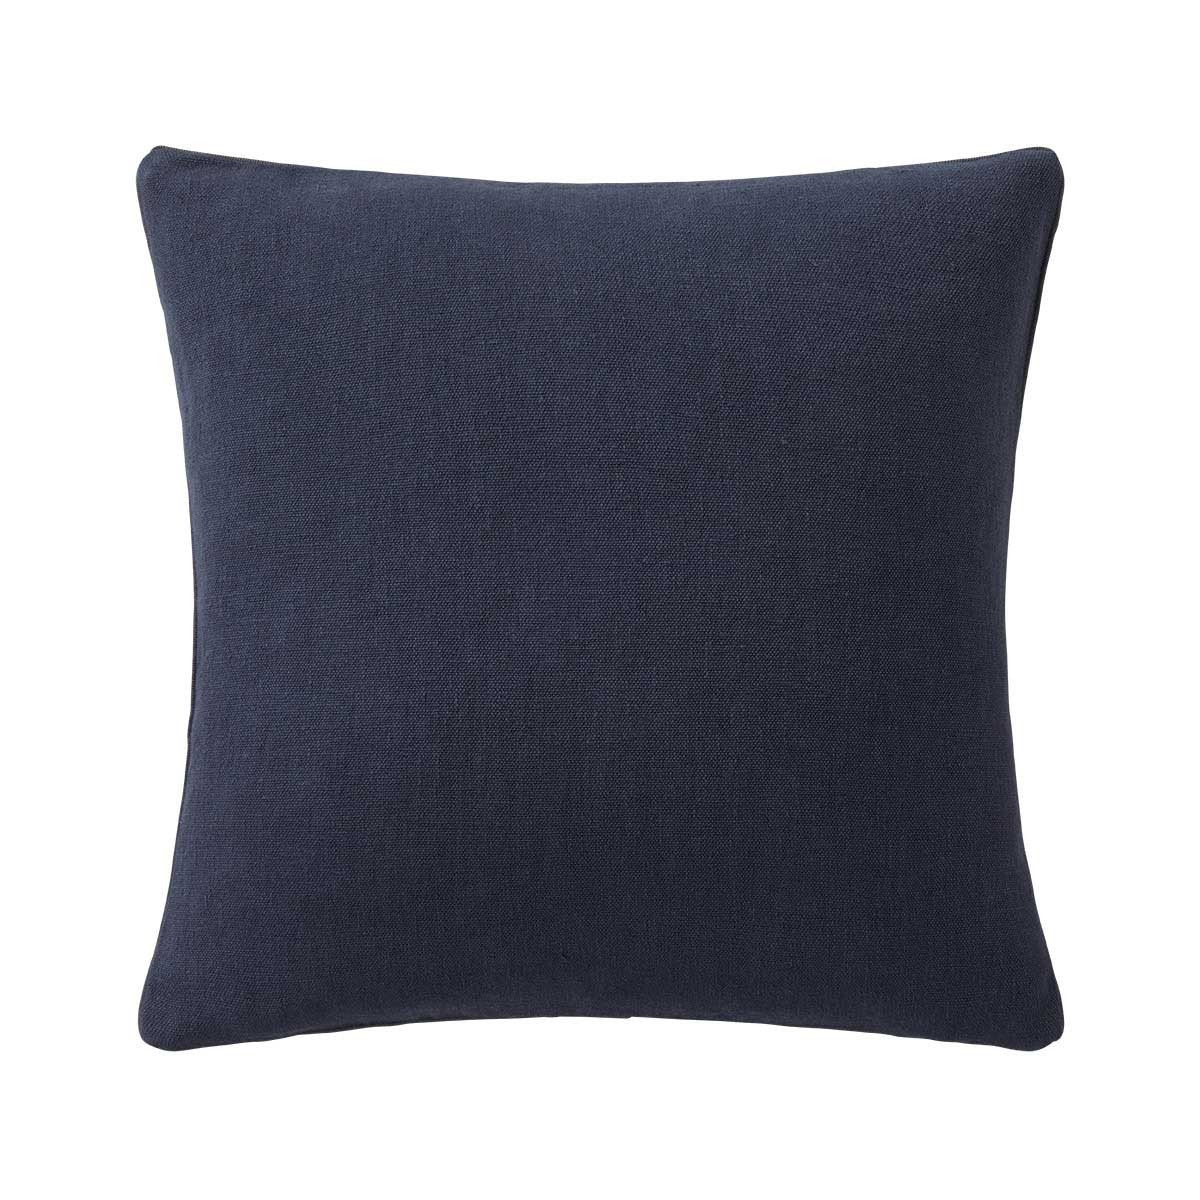 Pigment Nuit Square Decorative Pillow by Iosis | Fig Linens